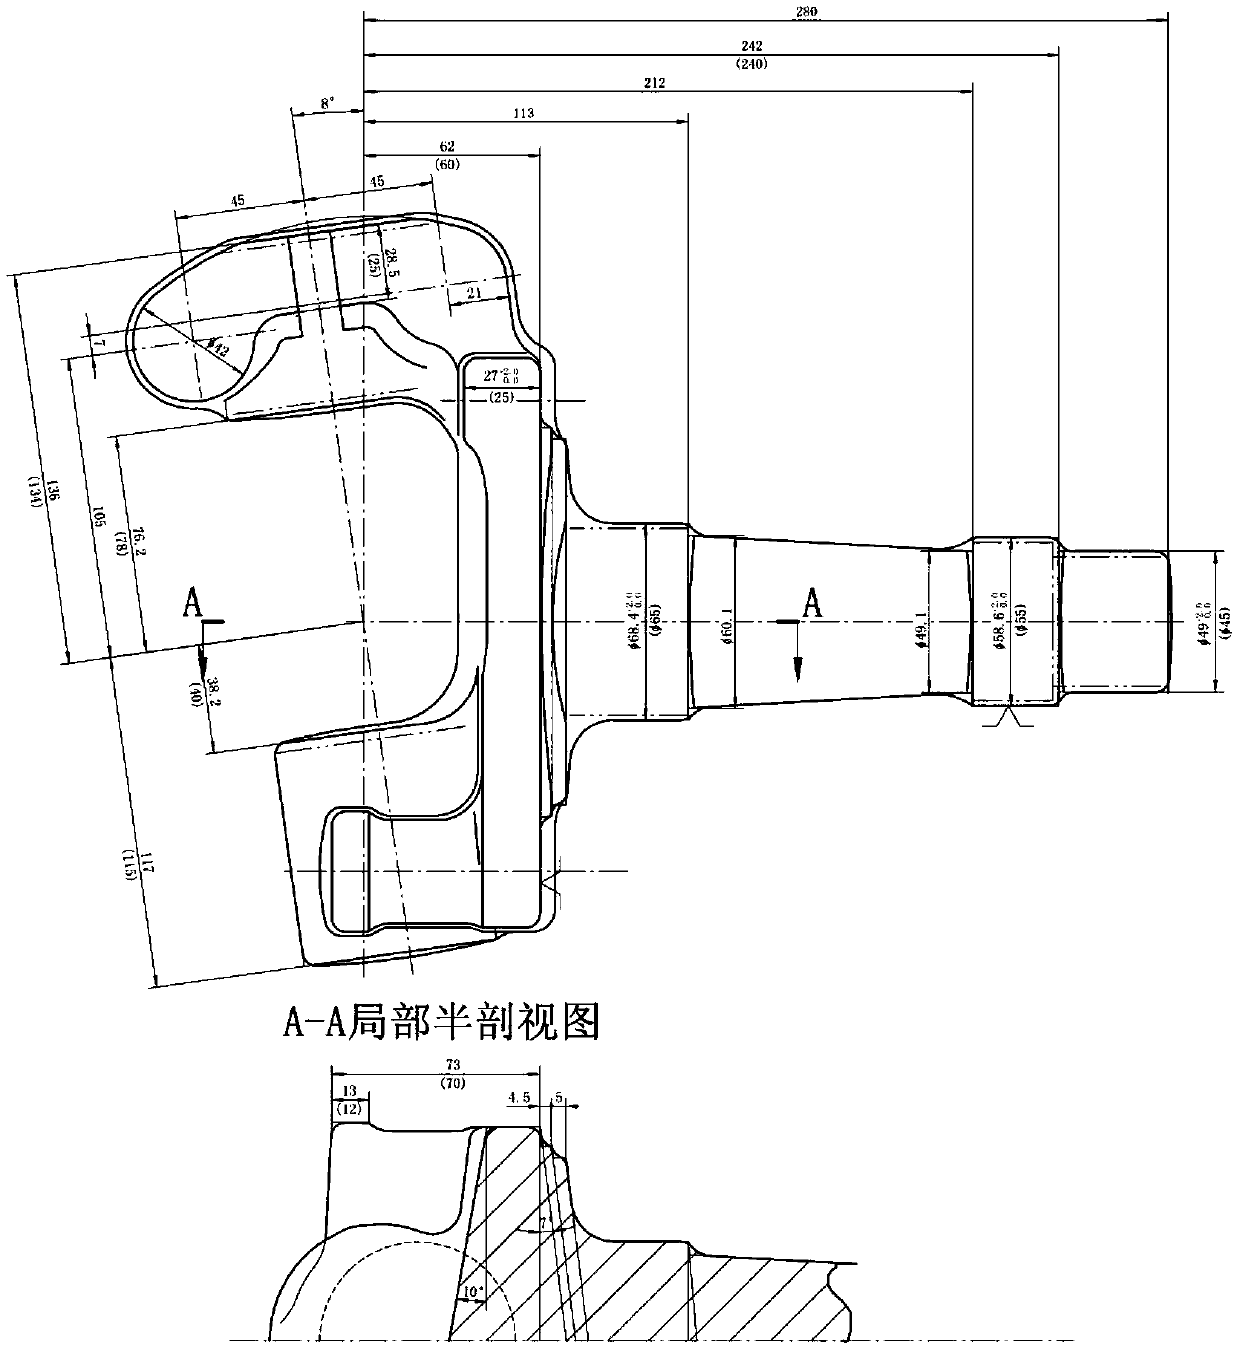 Technology and mold for pressure sizing and net shaping of drum-type knuckle flange